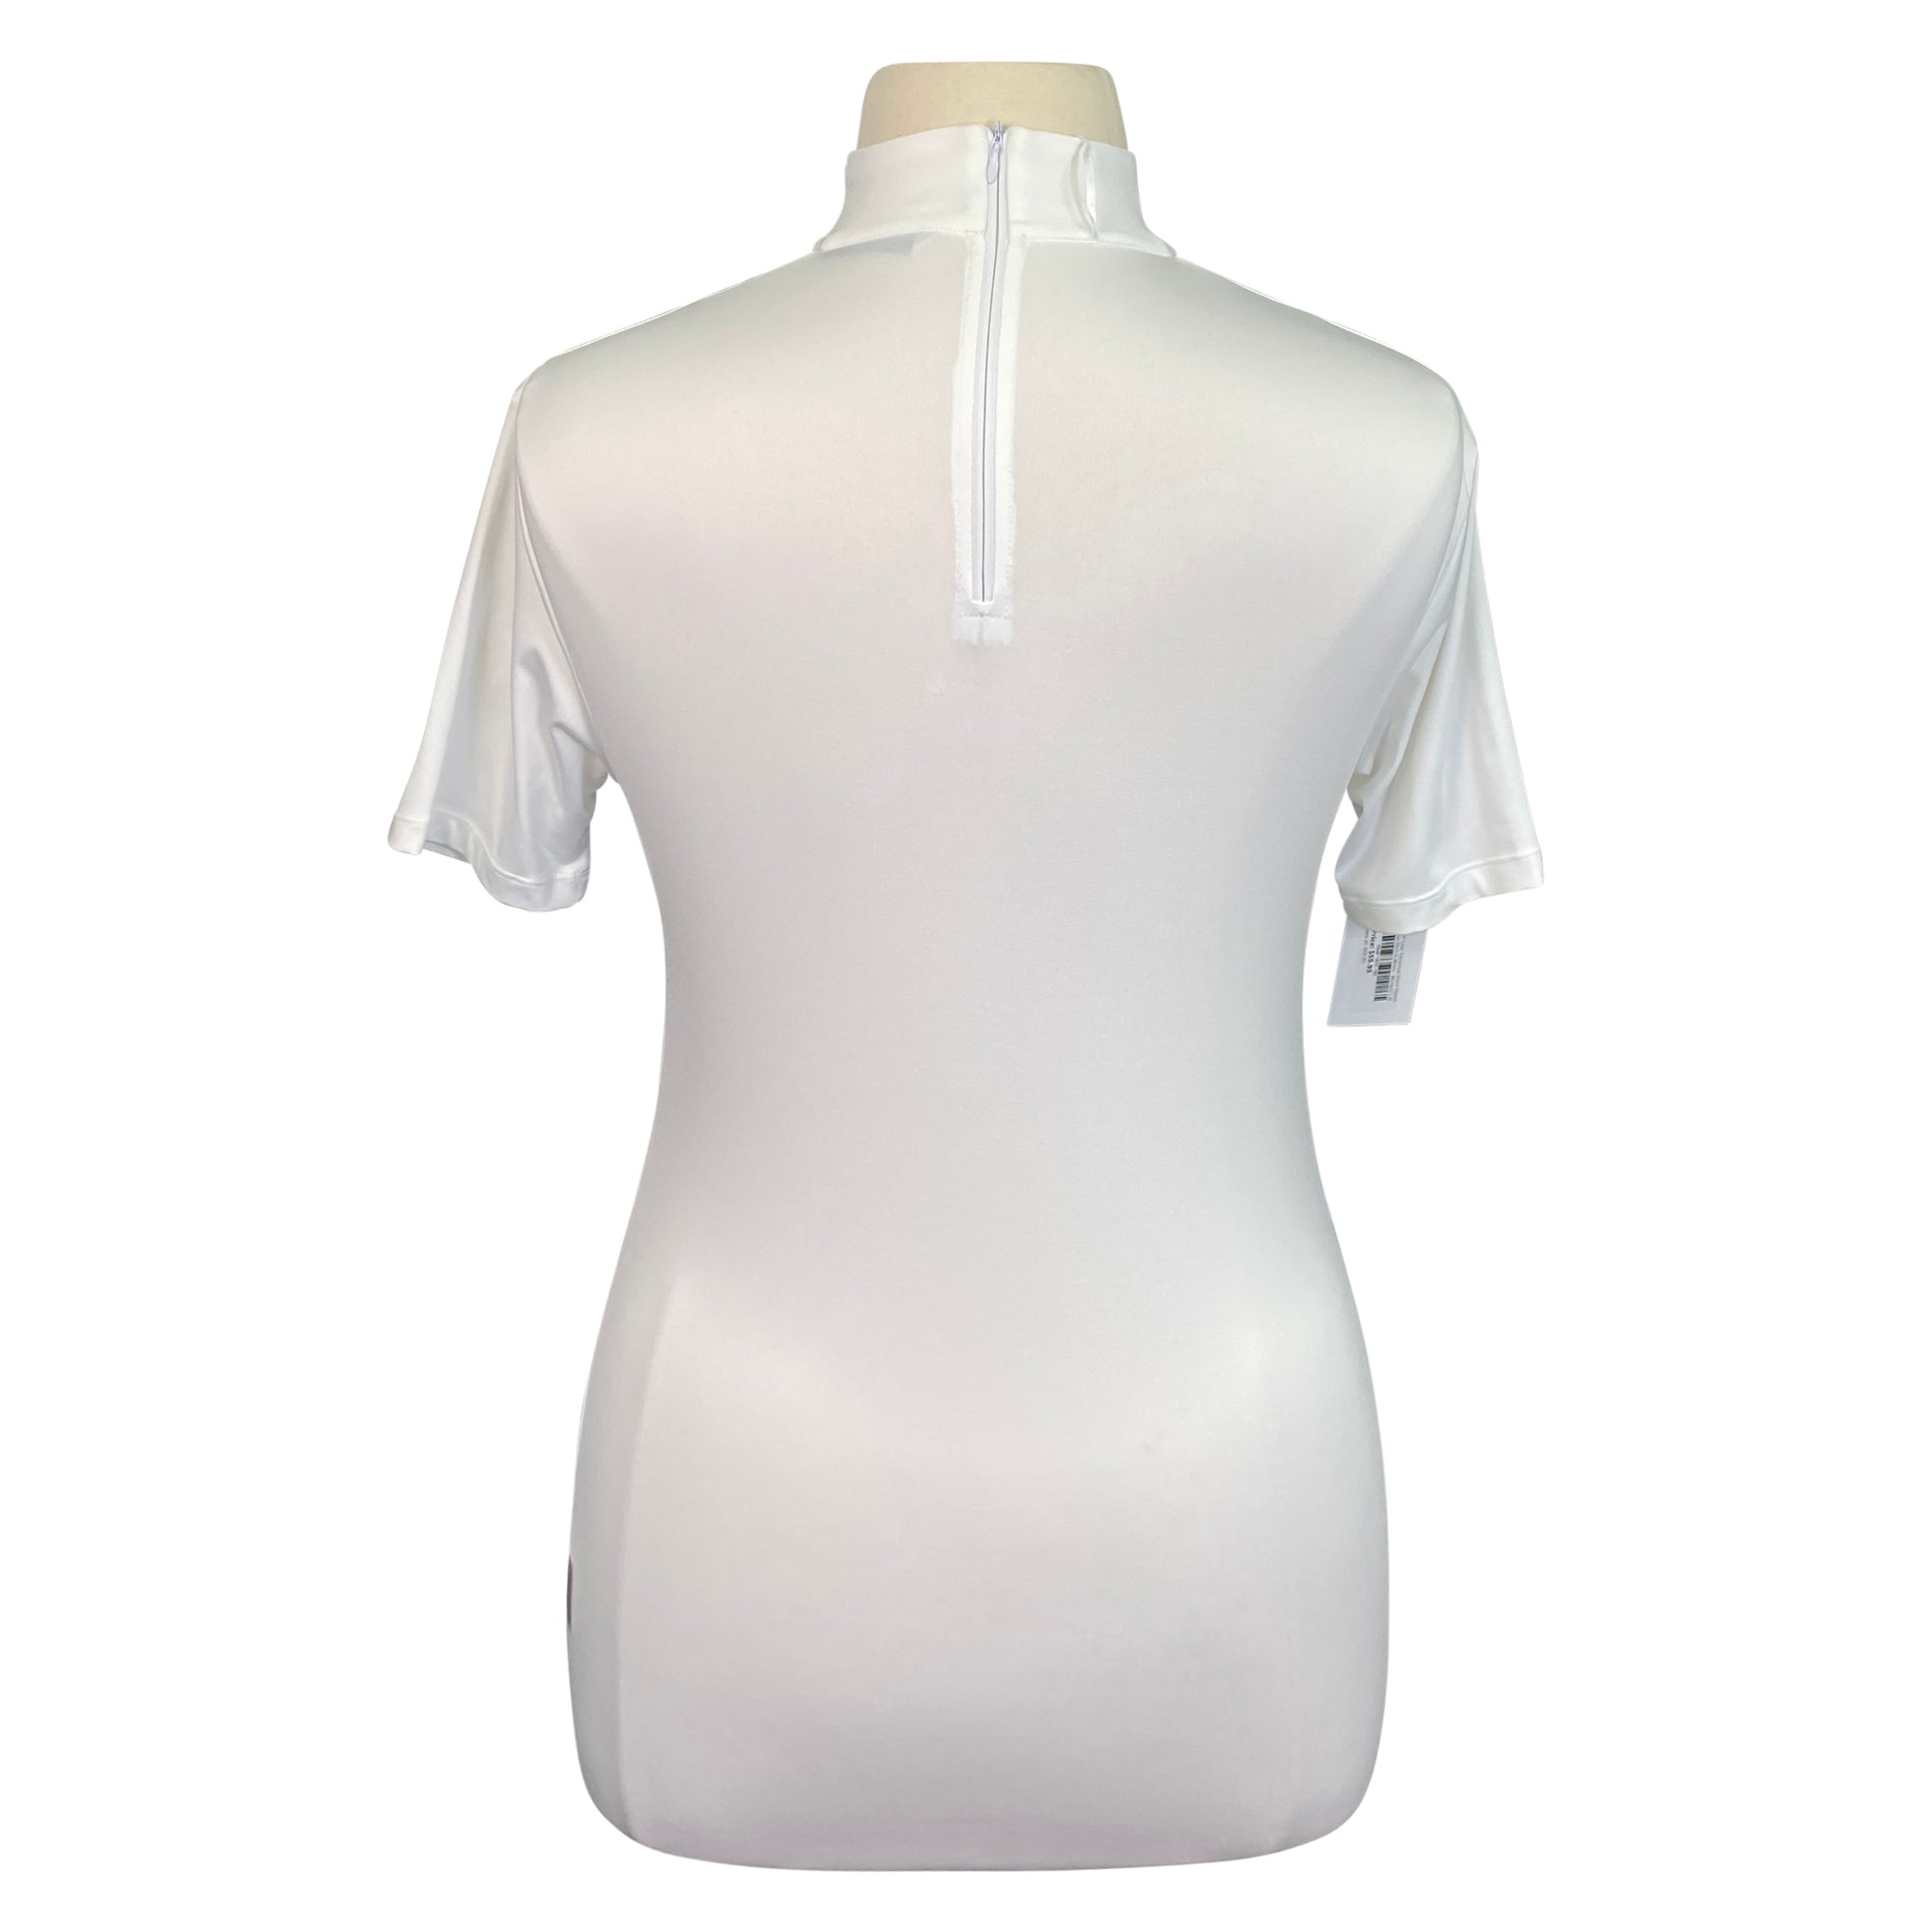 Horseware® 'Lisa' Technical Short Sleeve Competition Shirt in White